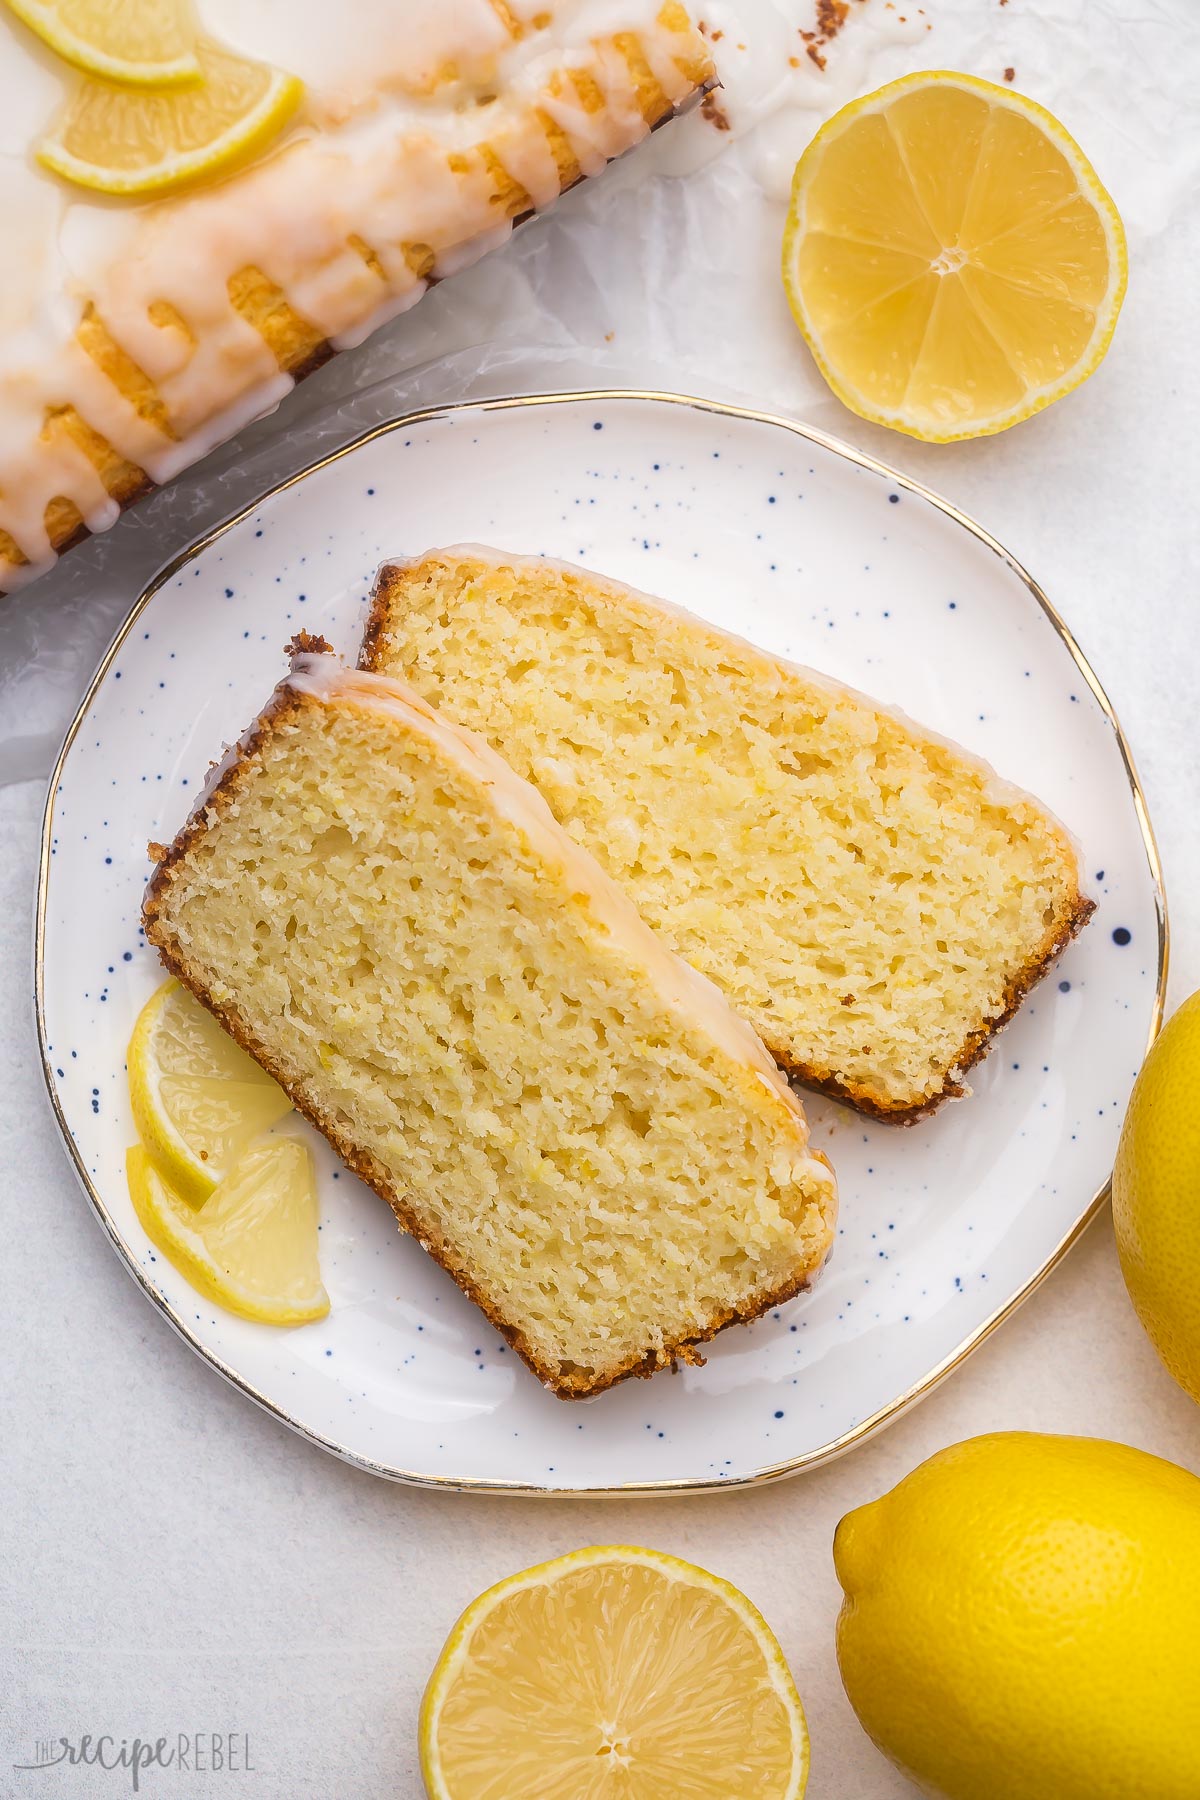 two slices of lemon bread on a white plate with lemons around it.